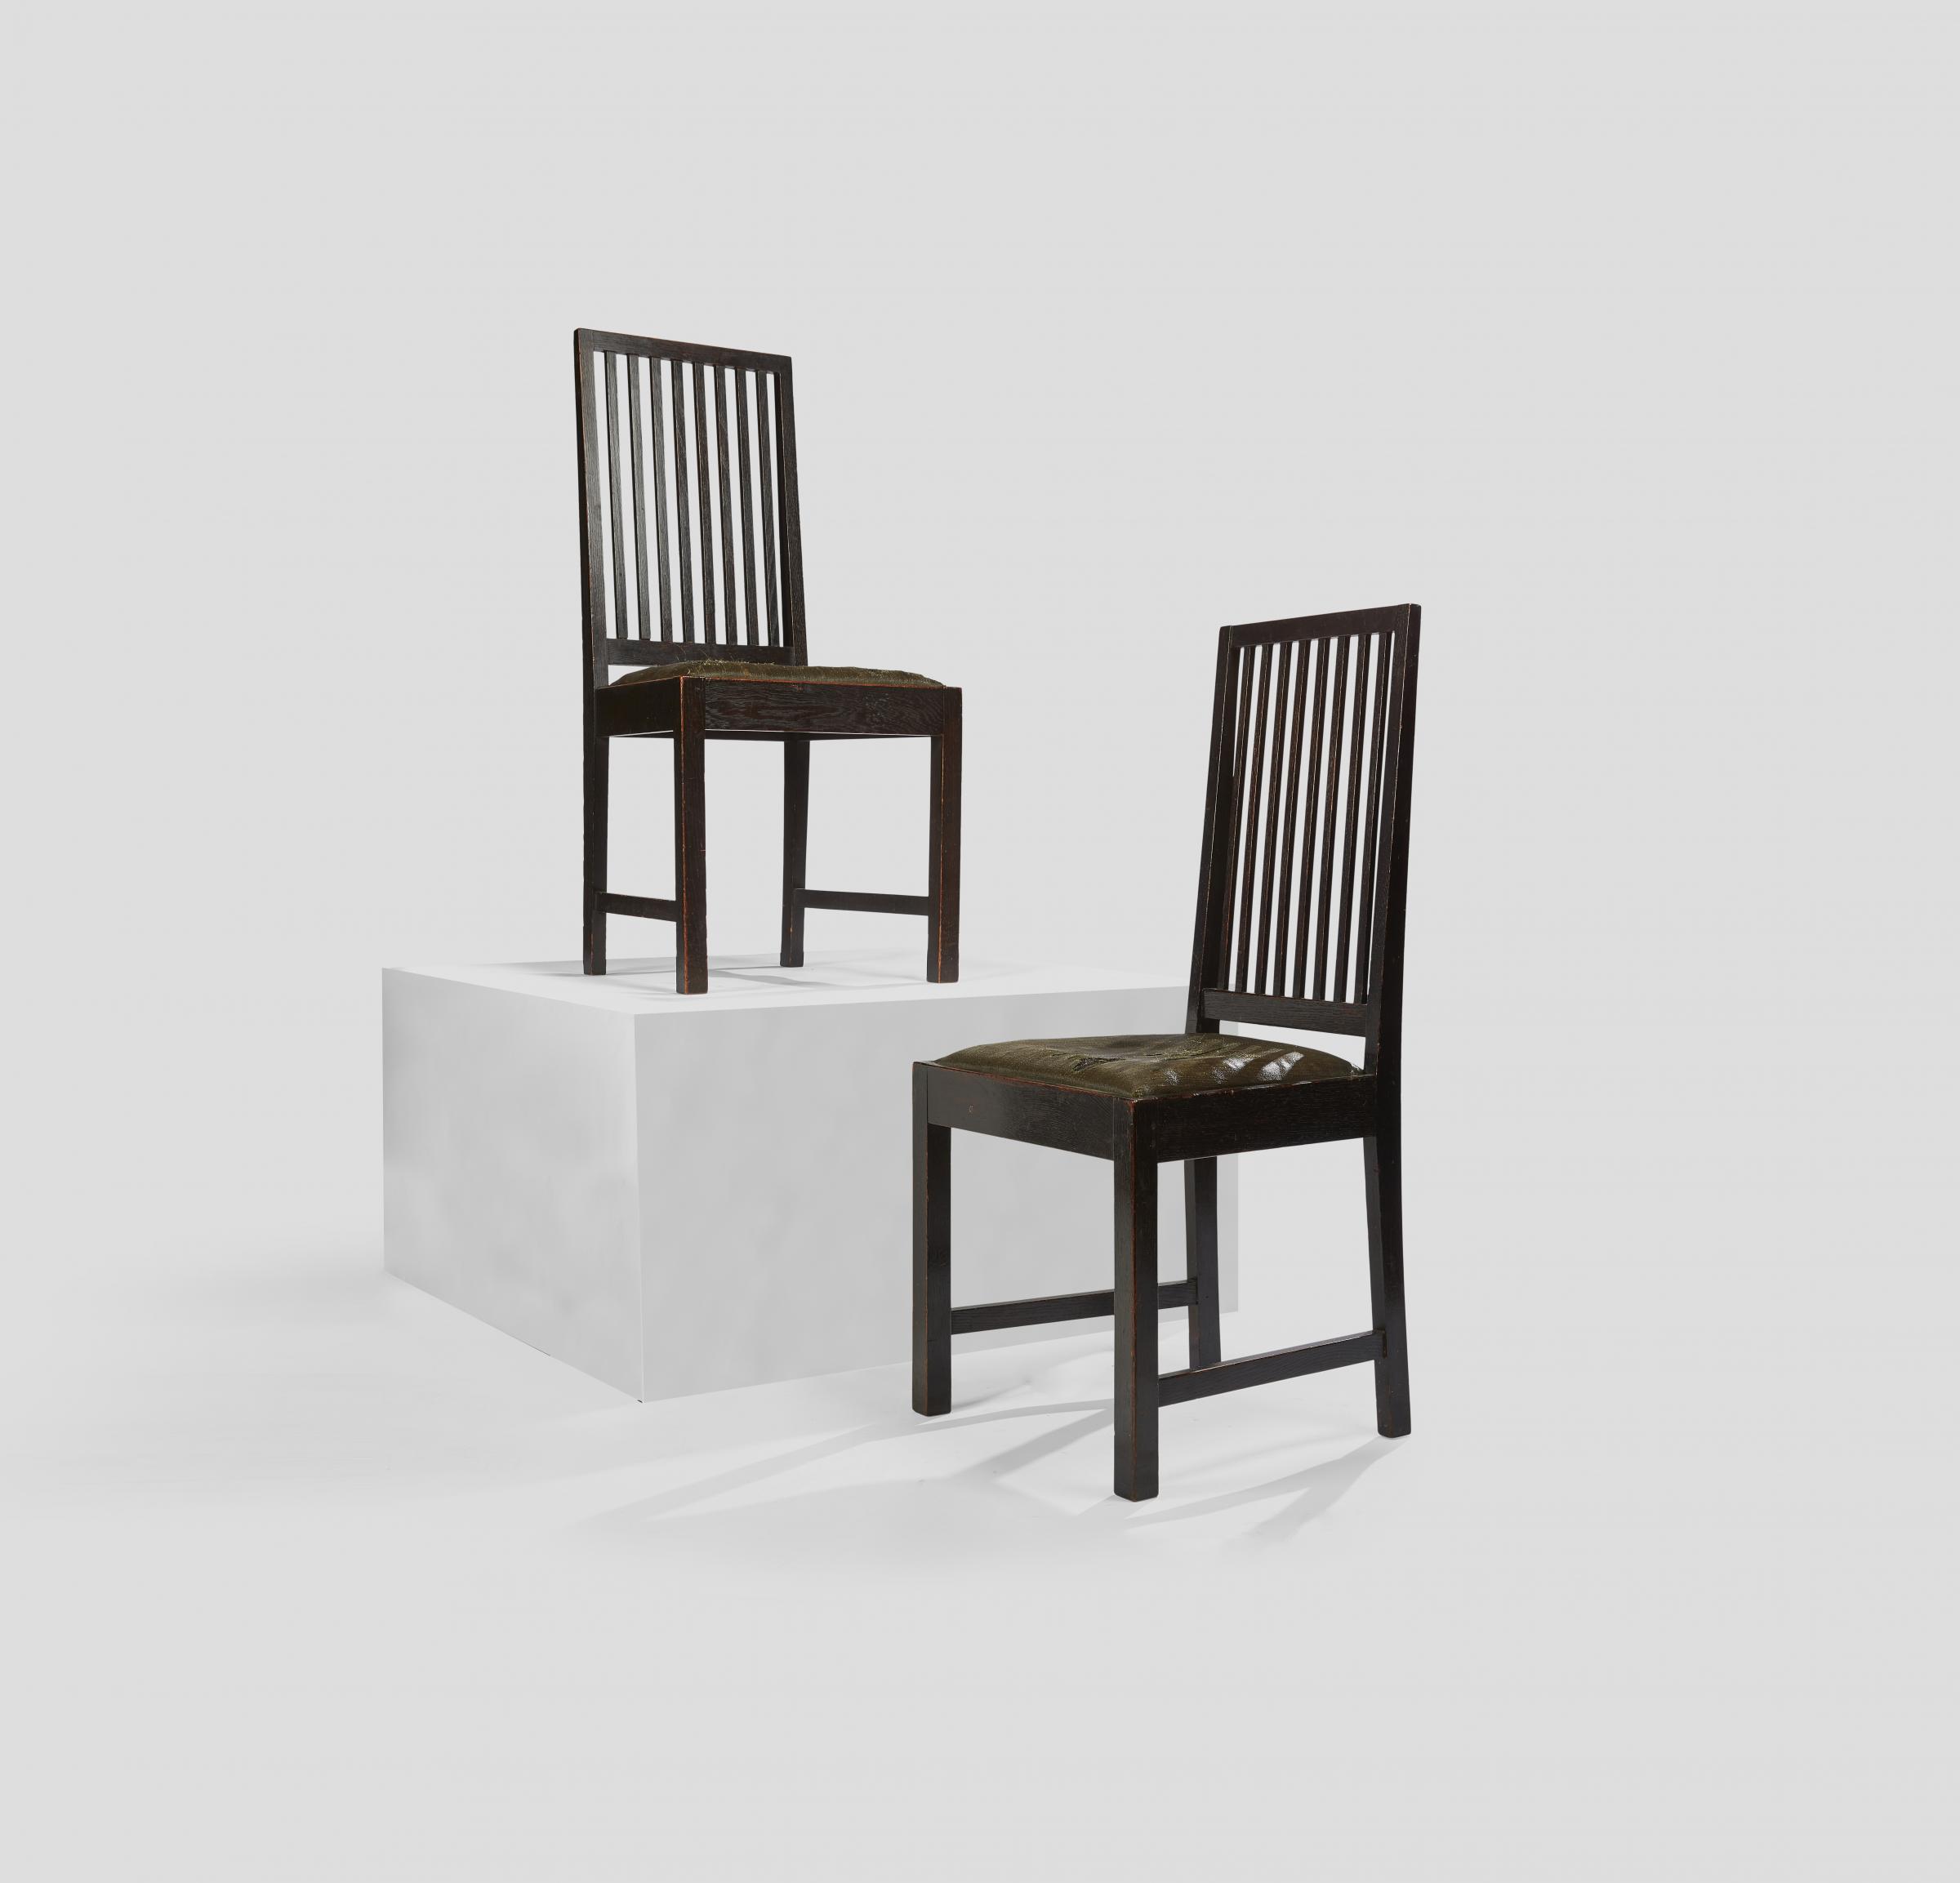 Charles Rennie Mackintosh designed chairs will go up for auction